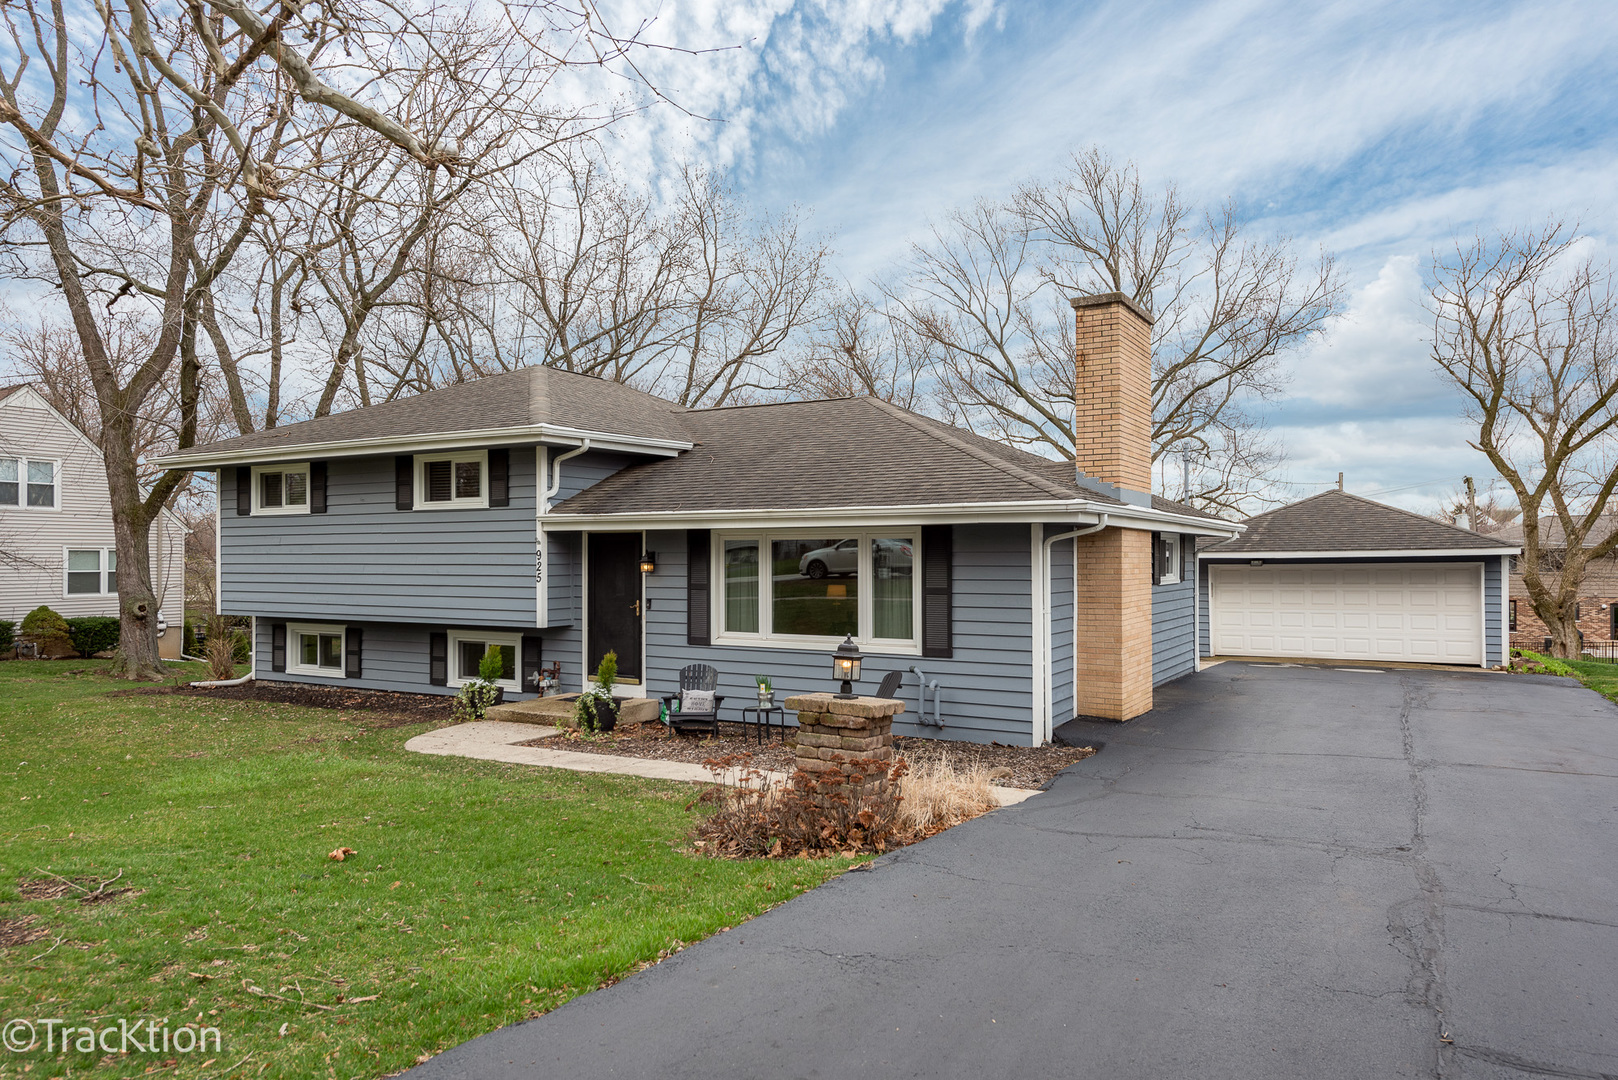 925 Meadowlawn Avenue, Downers Grove, Il 60516